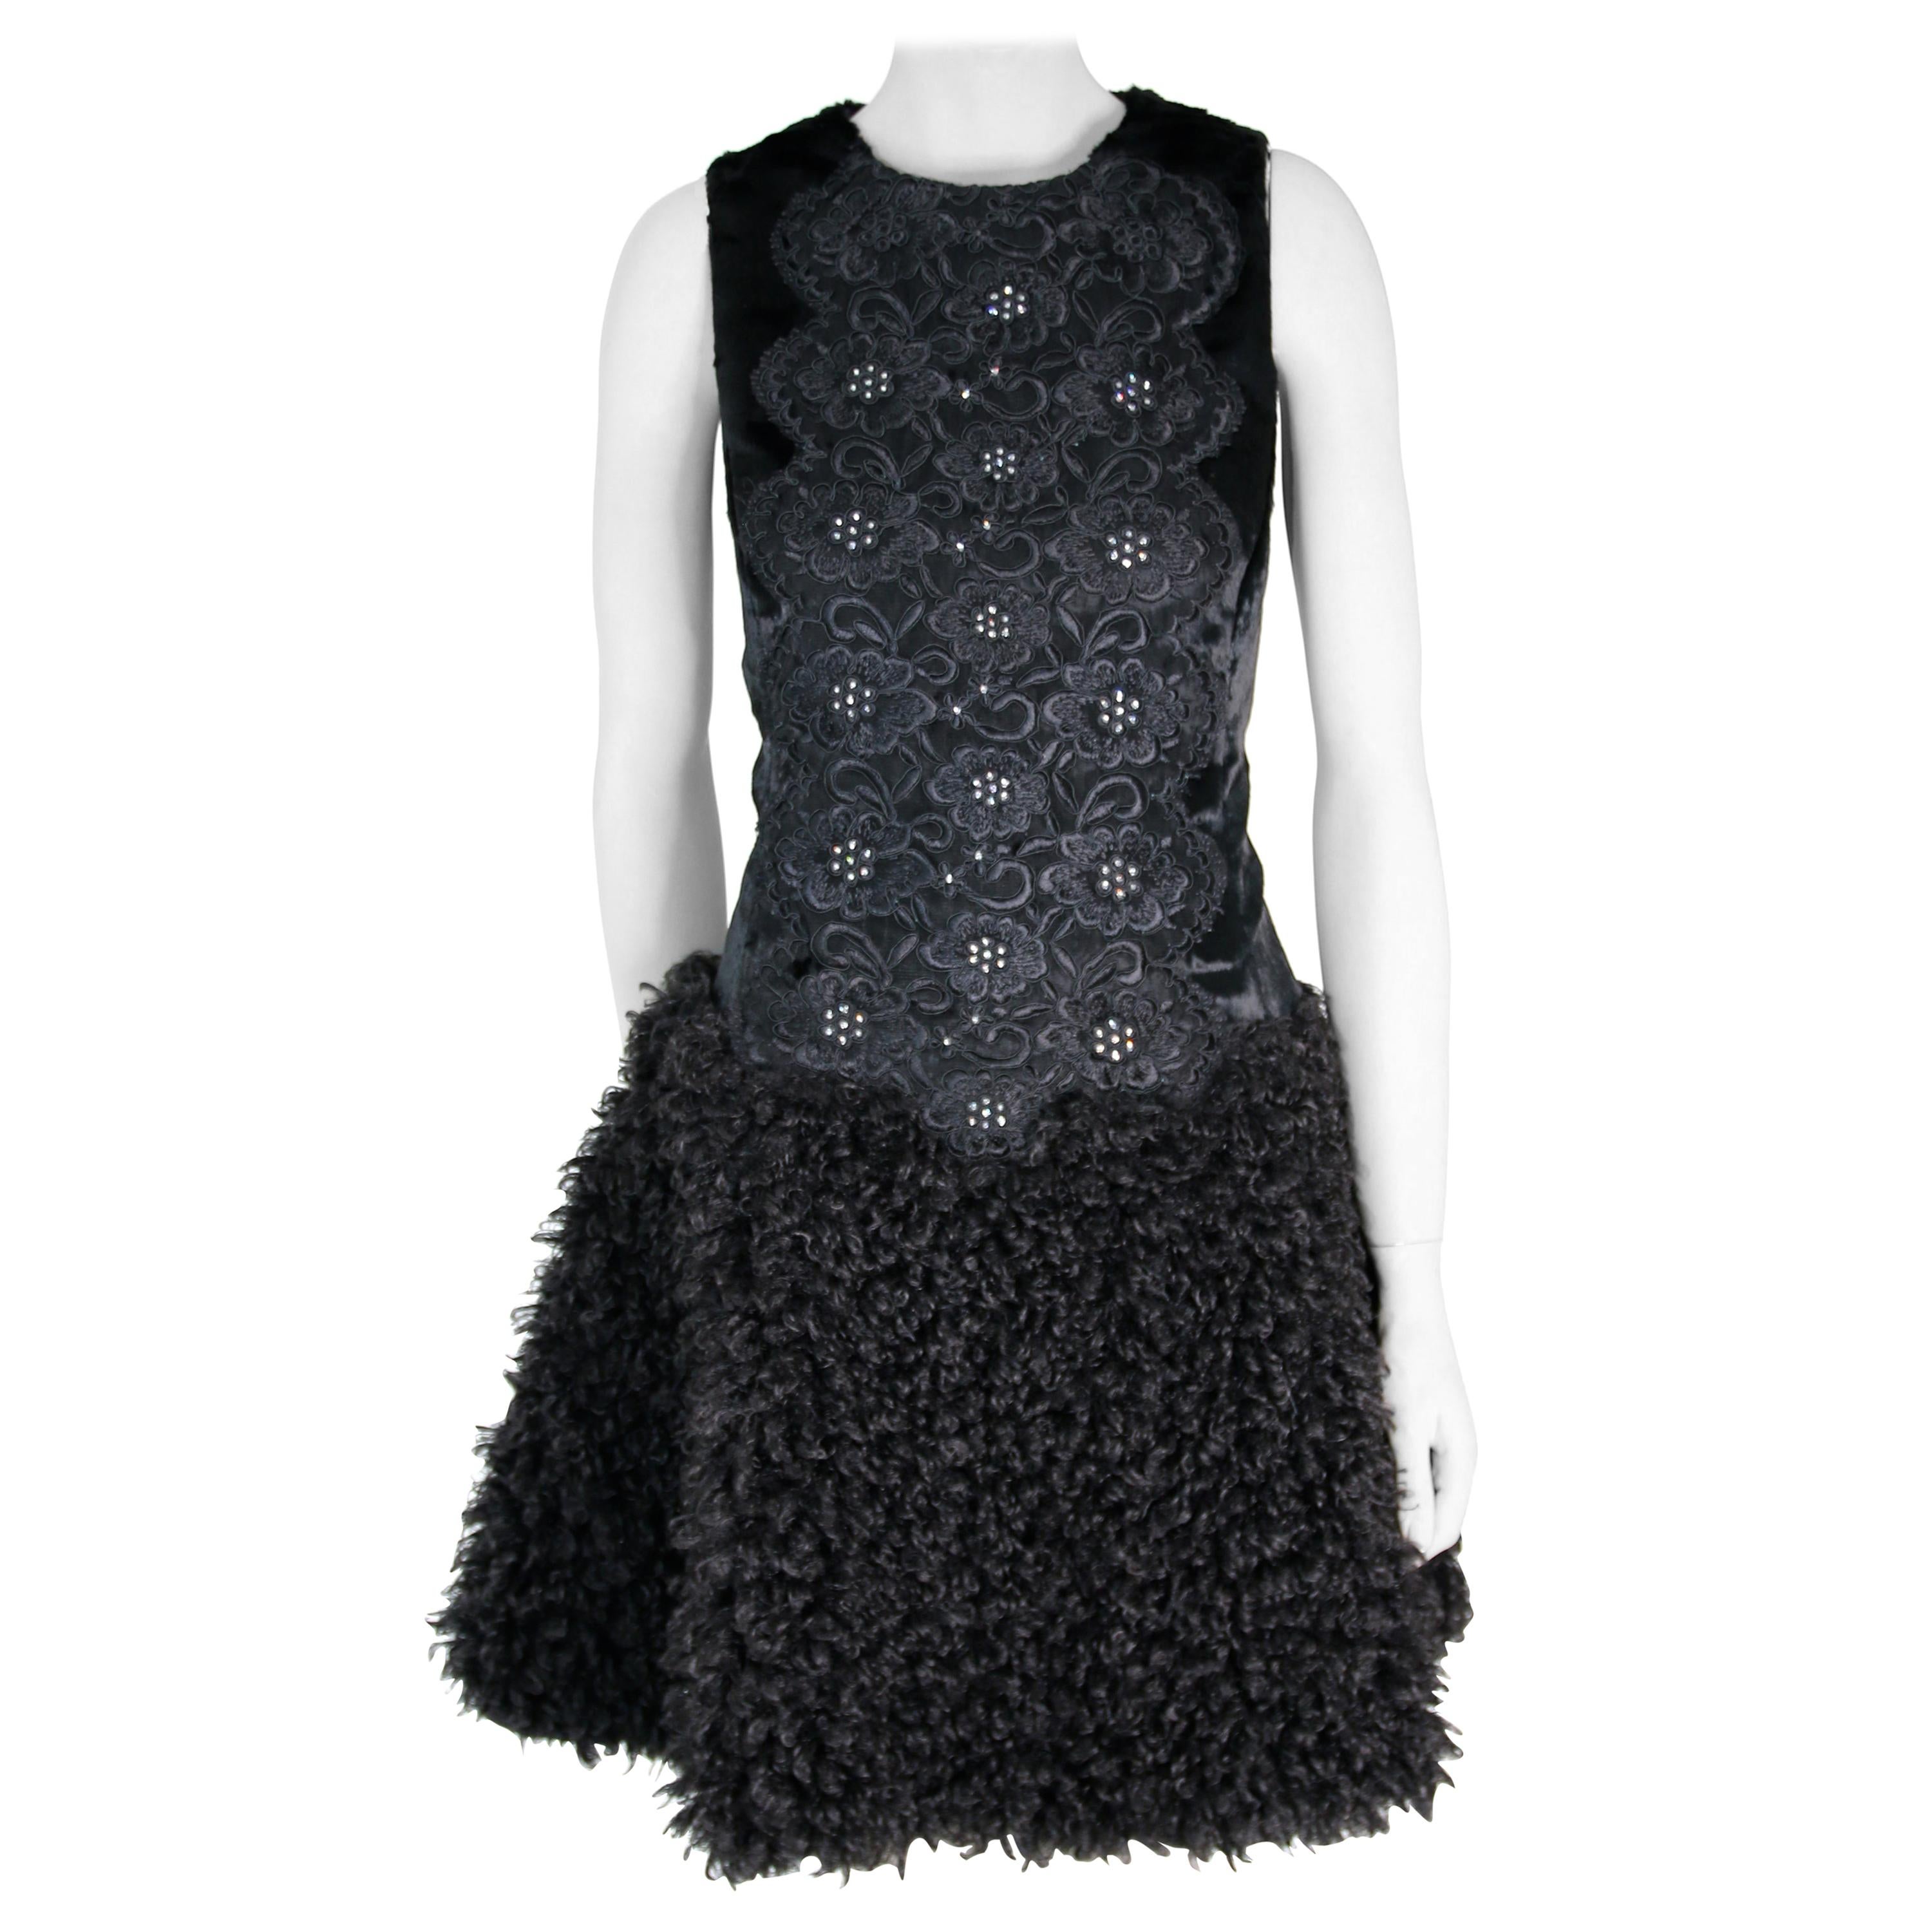 Pelush Black Boucle Faux Fur Dress With Guipure Lace and Swarovski Crystals - S